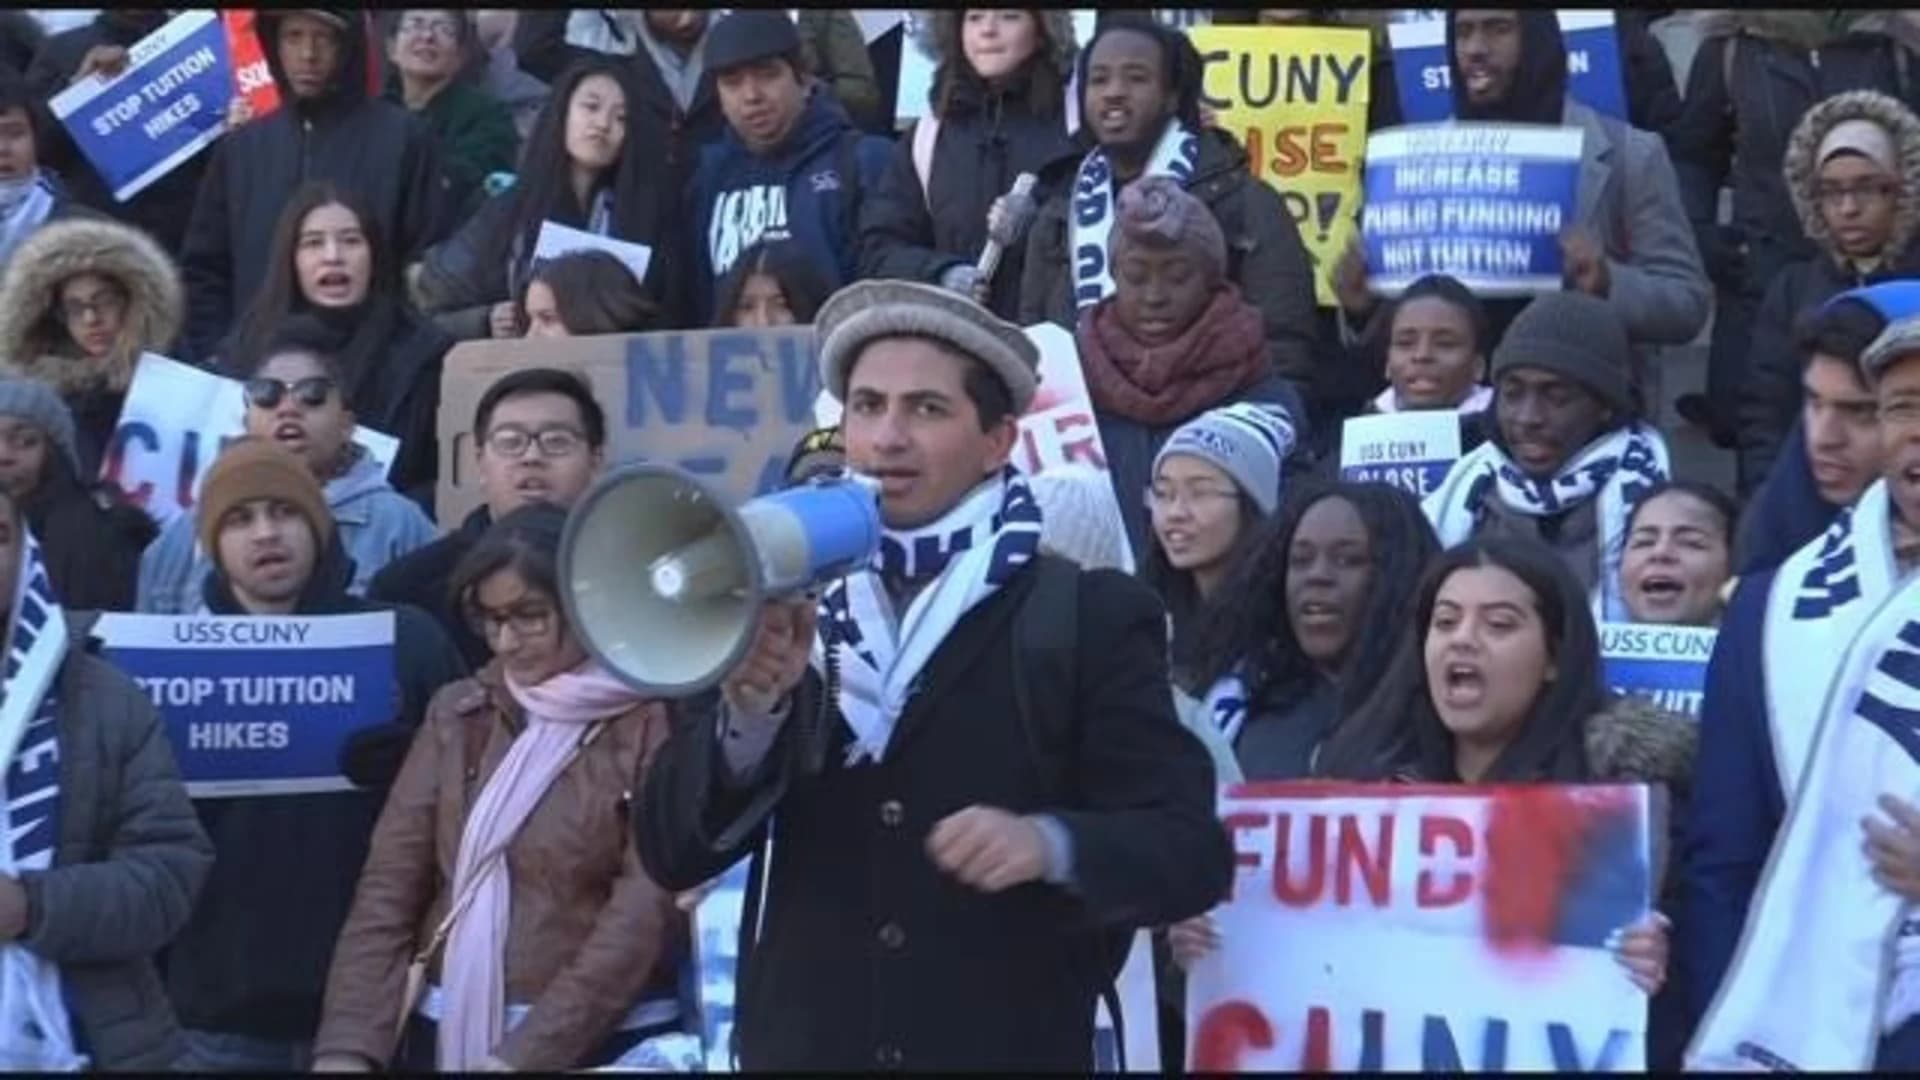 CUNY students march across Brooklyn Bridge to urge action on funding